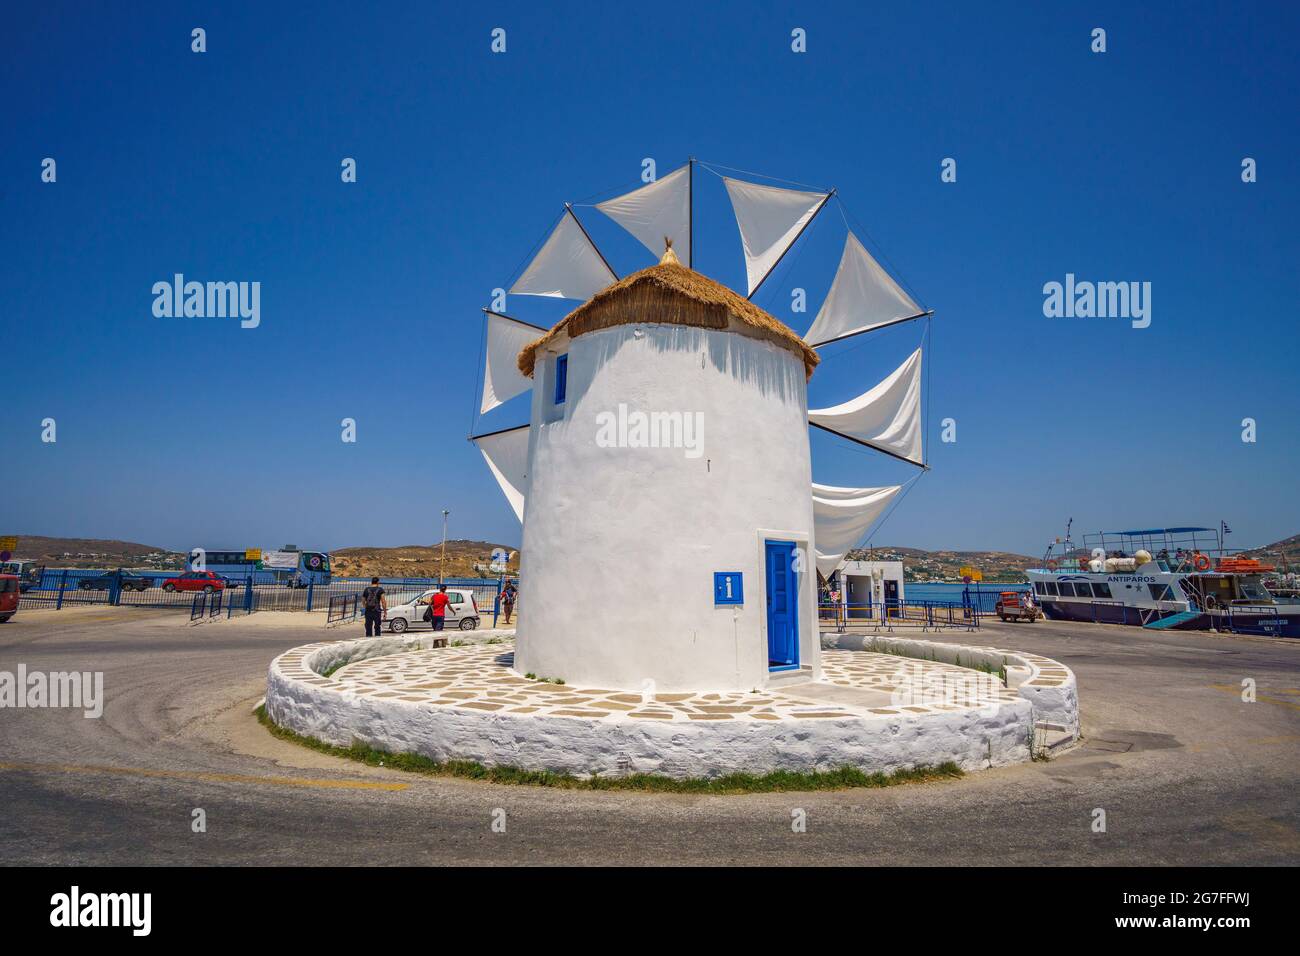 PAROS, CYCLADES, GREECE - JUNE 2017: Traditional cycladic windmill against a deep blue sky in a beautiful summer day on Paros island, Cyclades, Greece Stock Photo